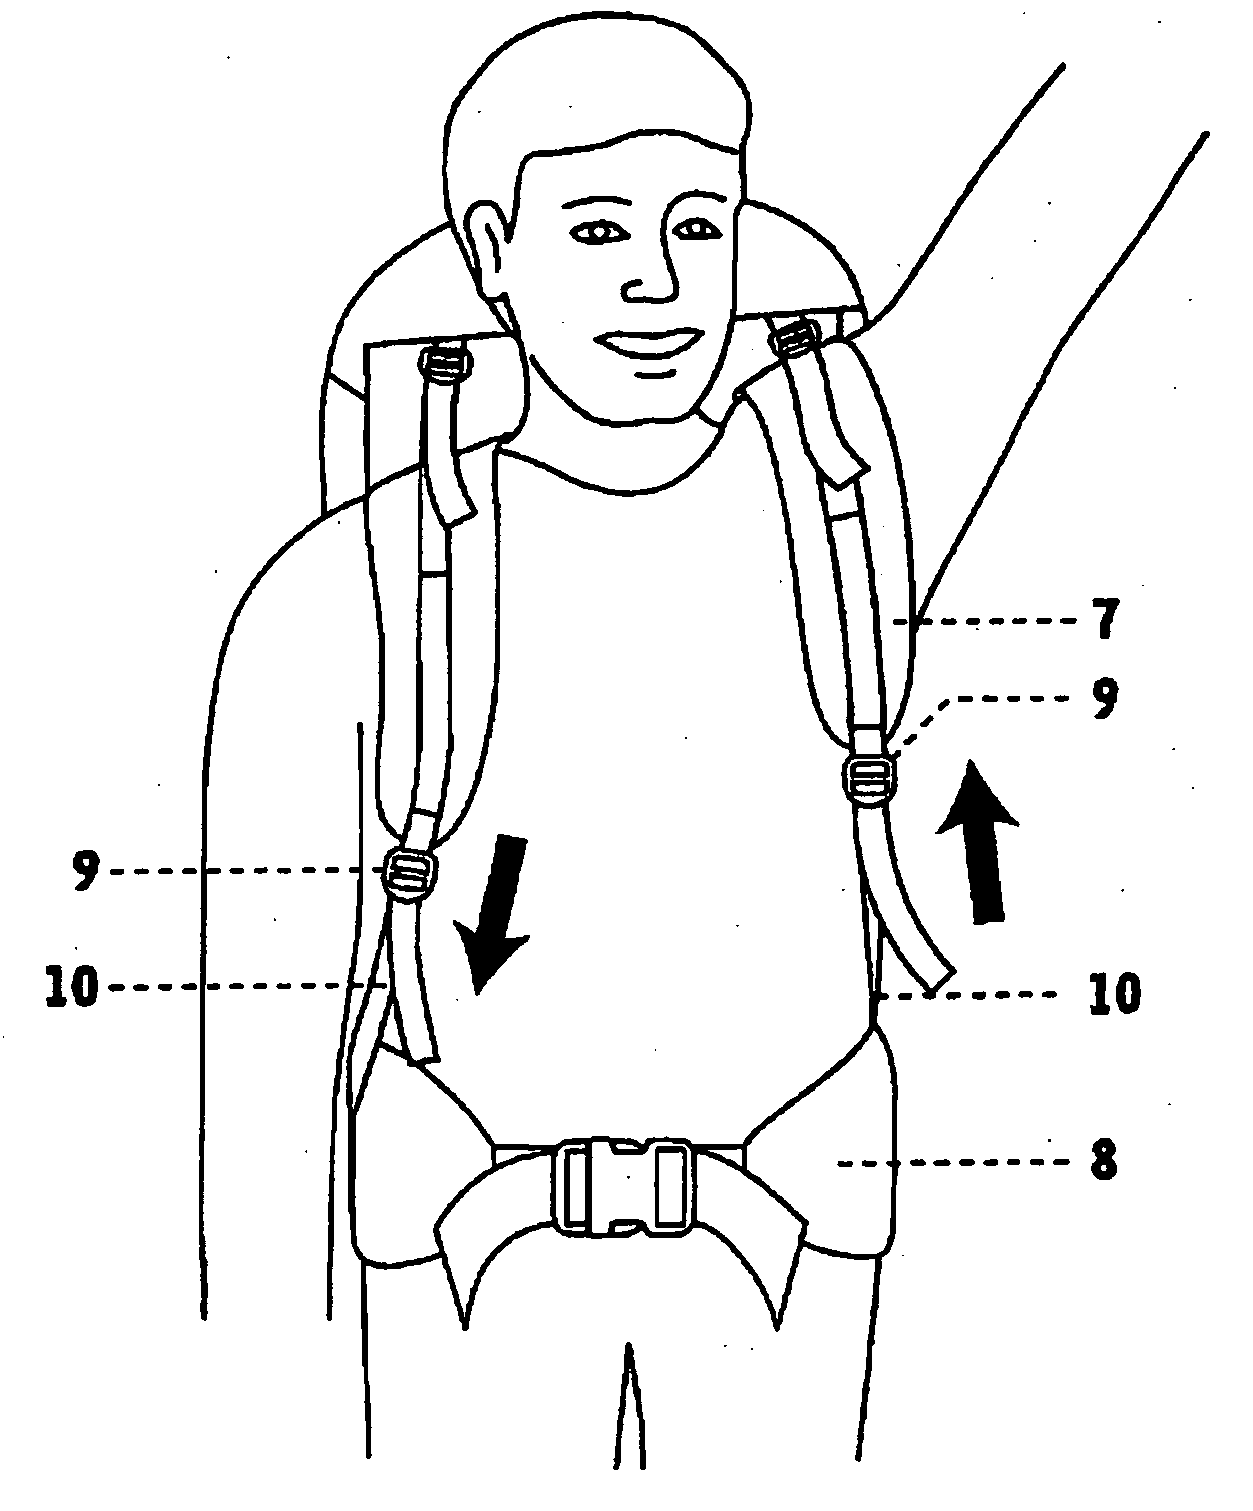 Backpack with shoulder movement harness system